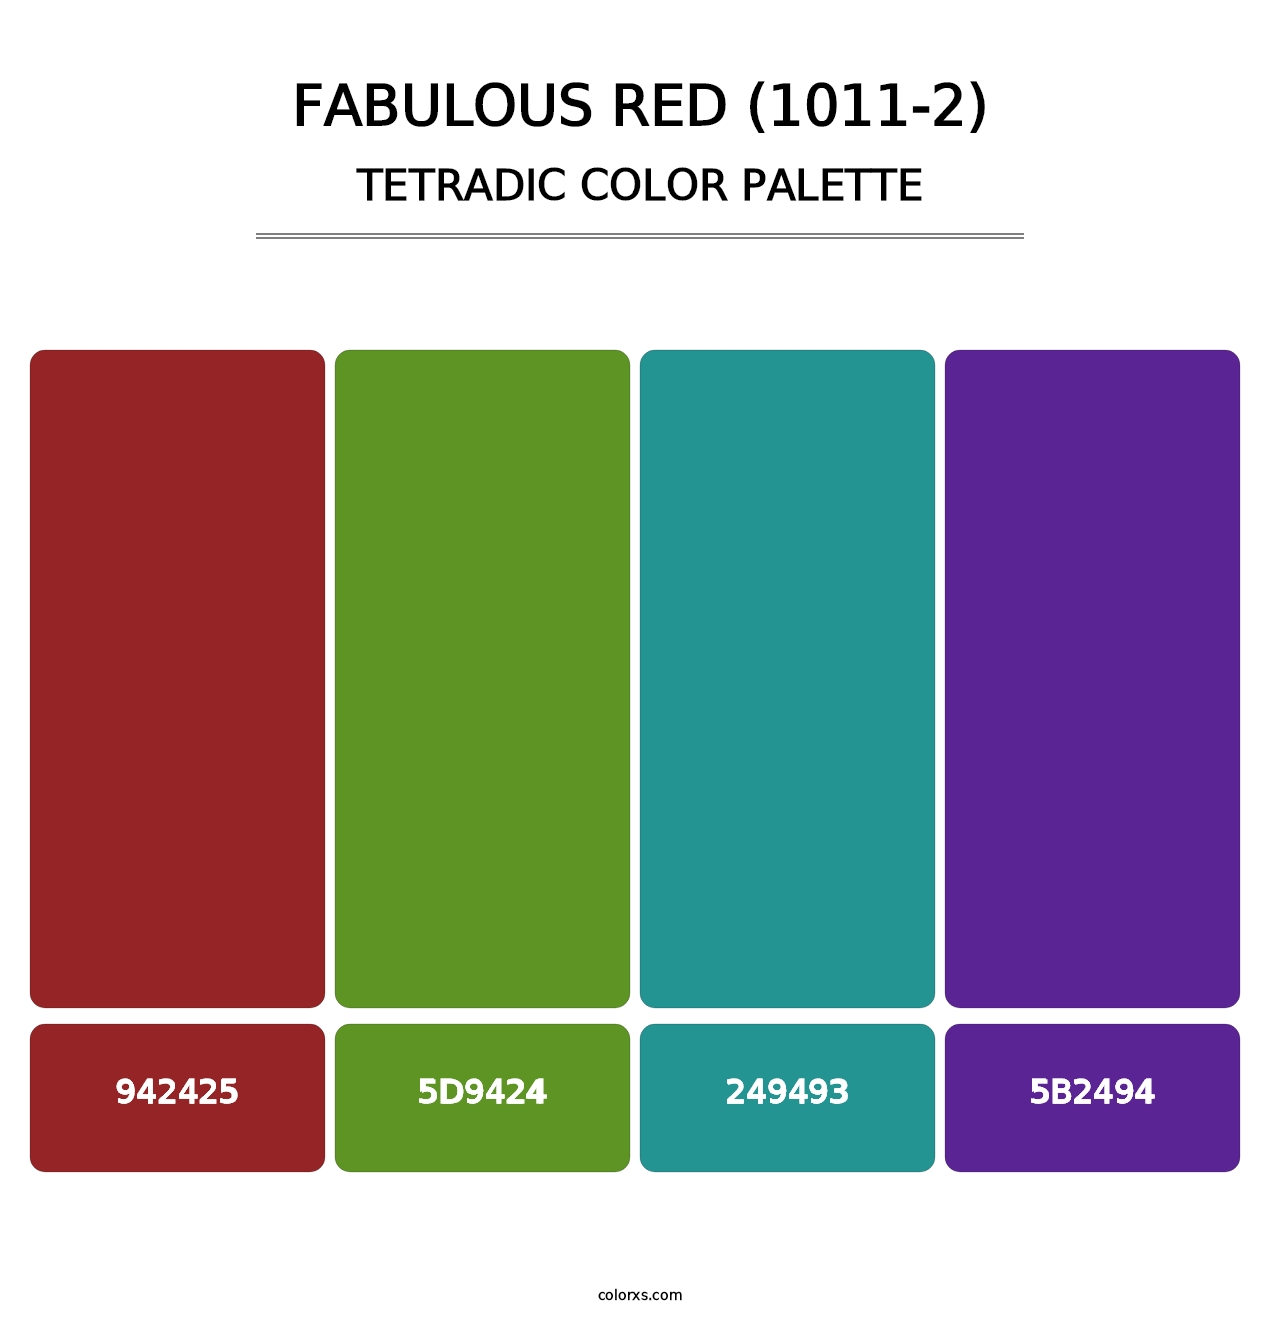 Fabulous Red (1011-2) - Tetradic Color Palette